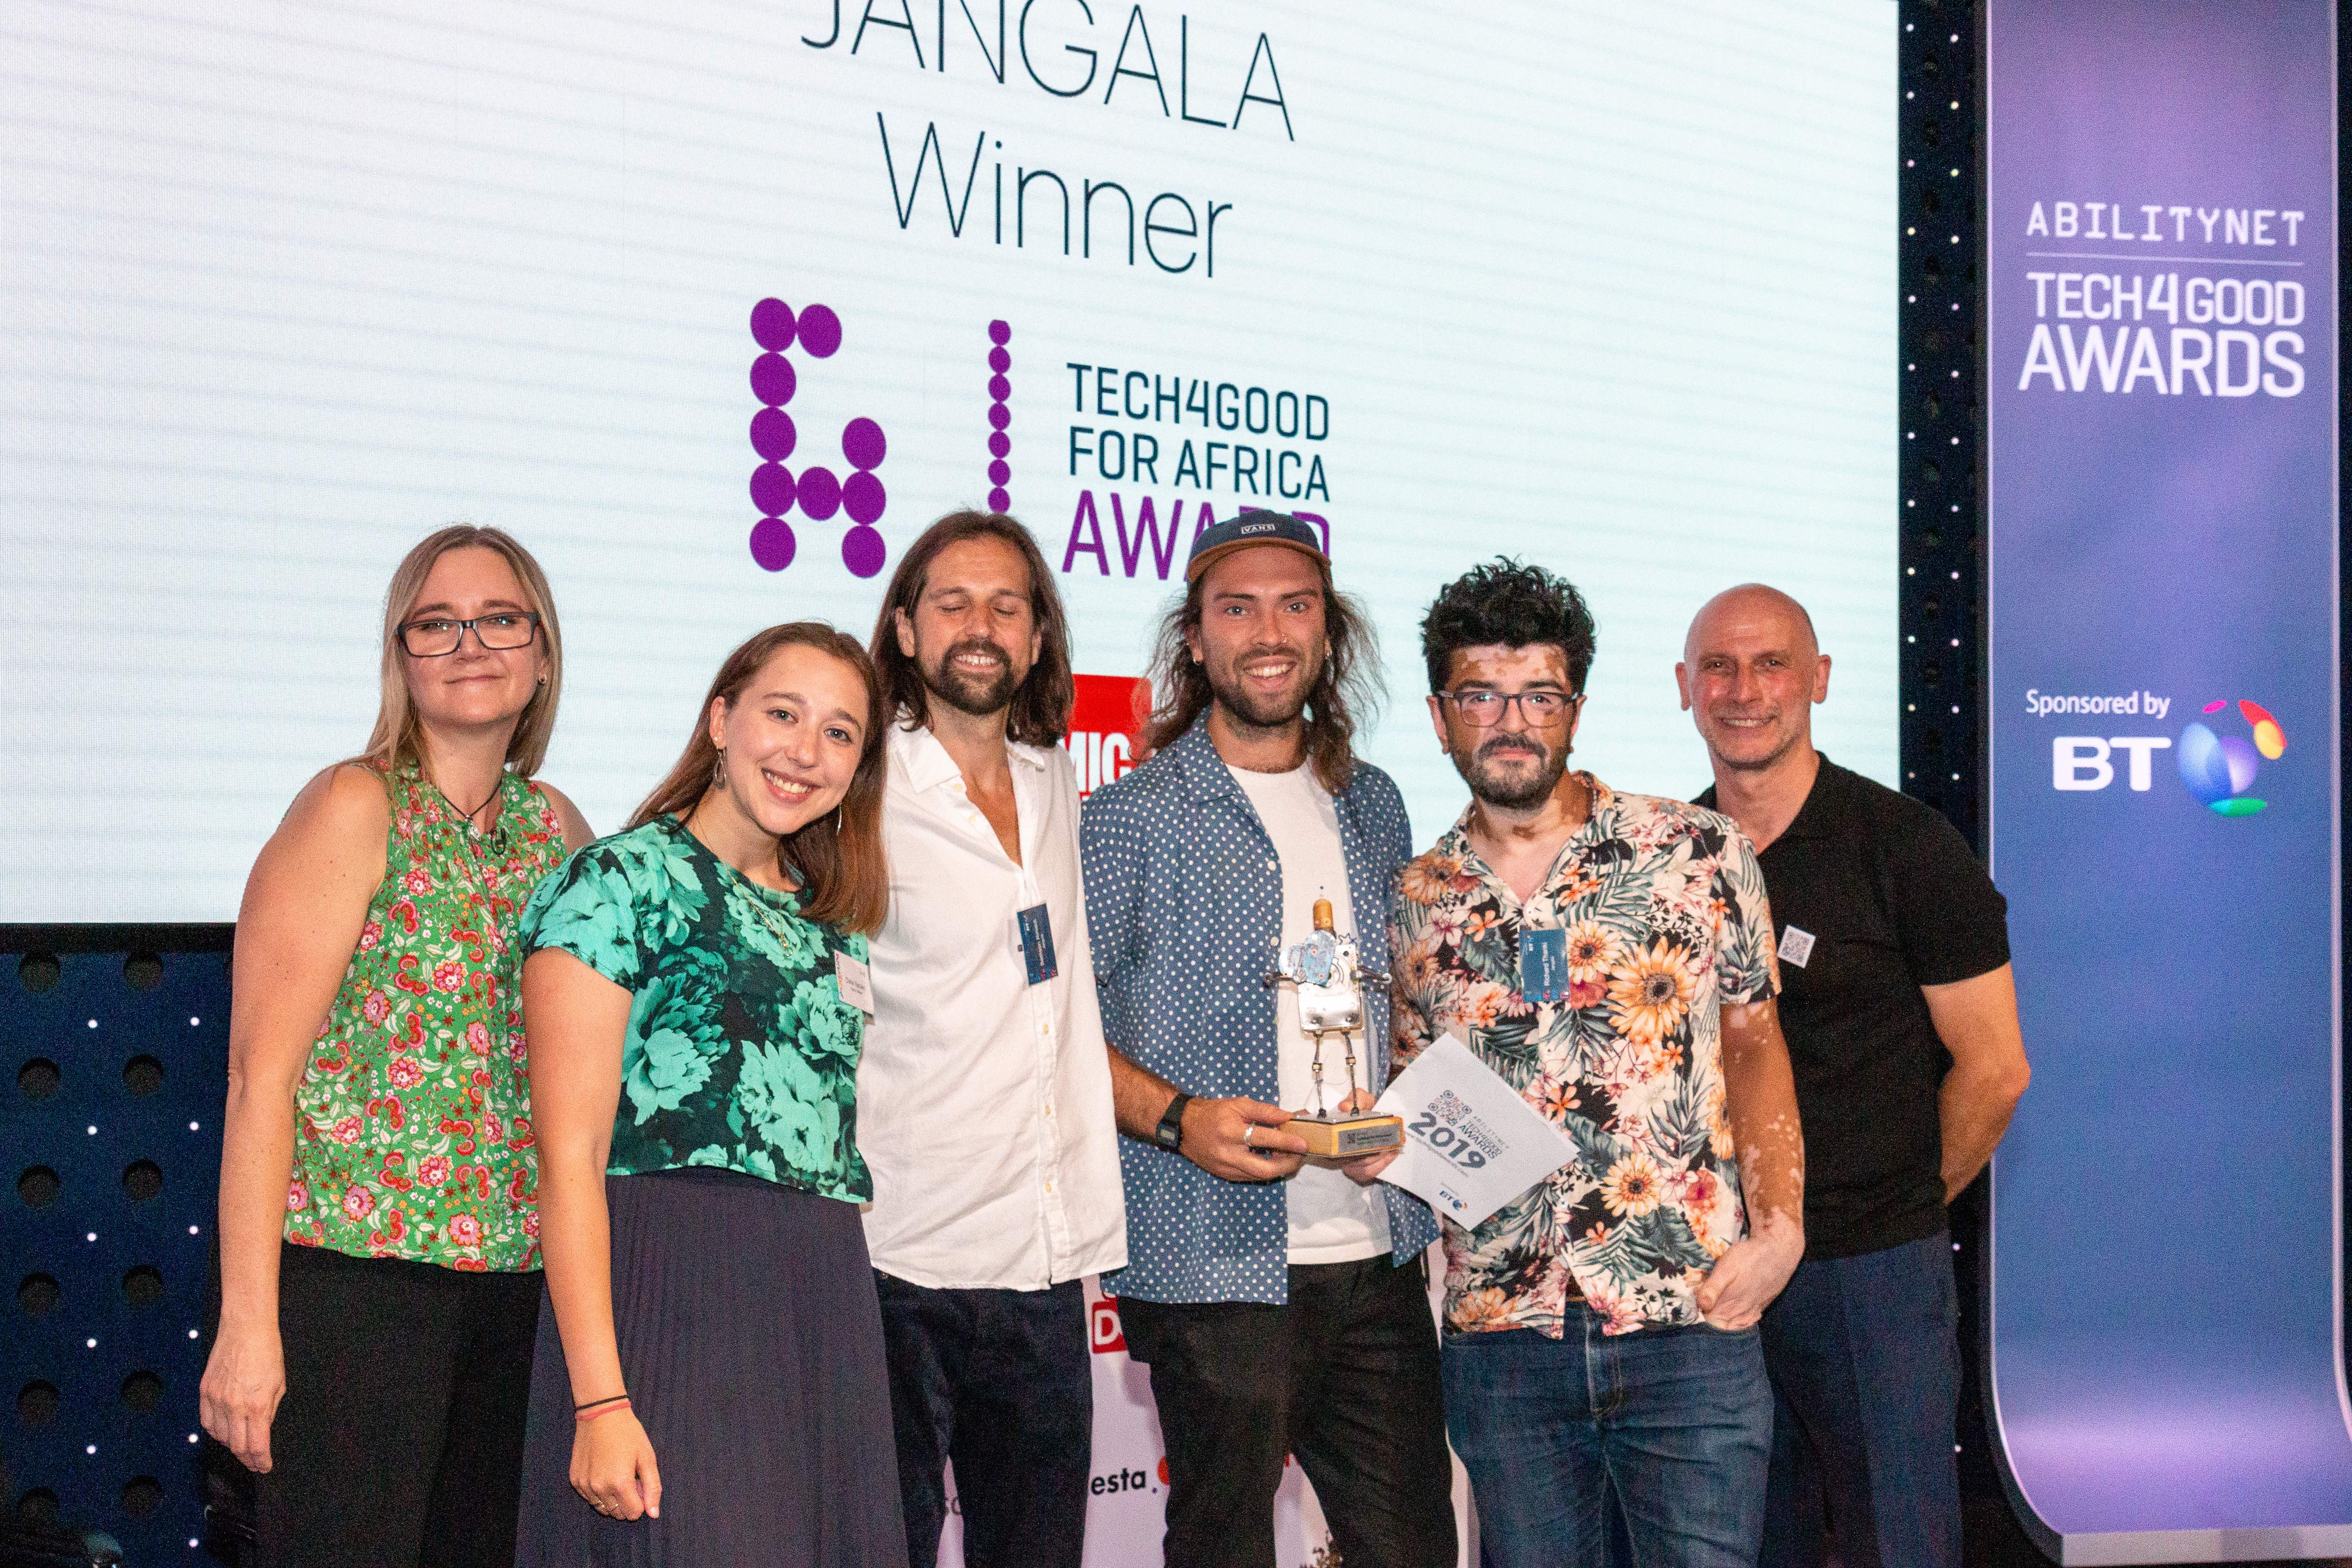 Image shows Jangala receiving its Tech4Good Award at the 2019 ceremony